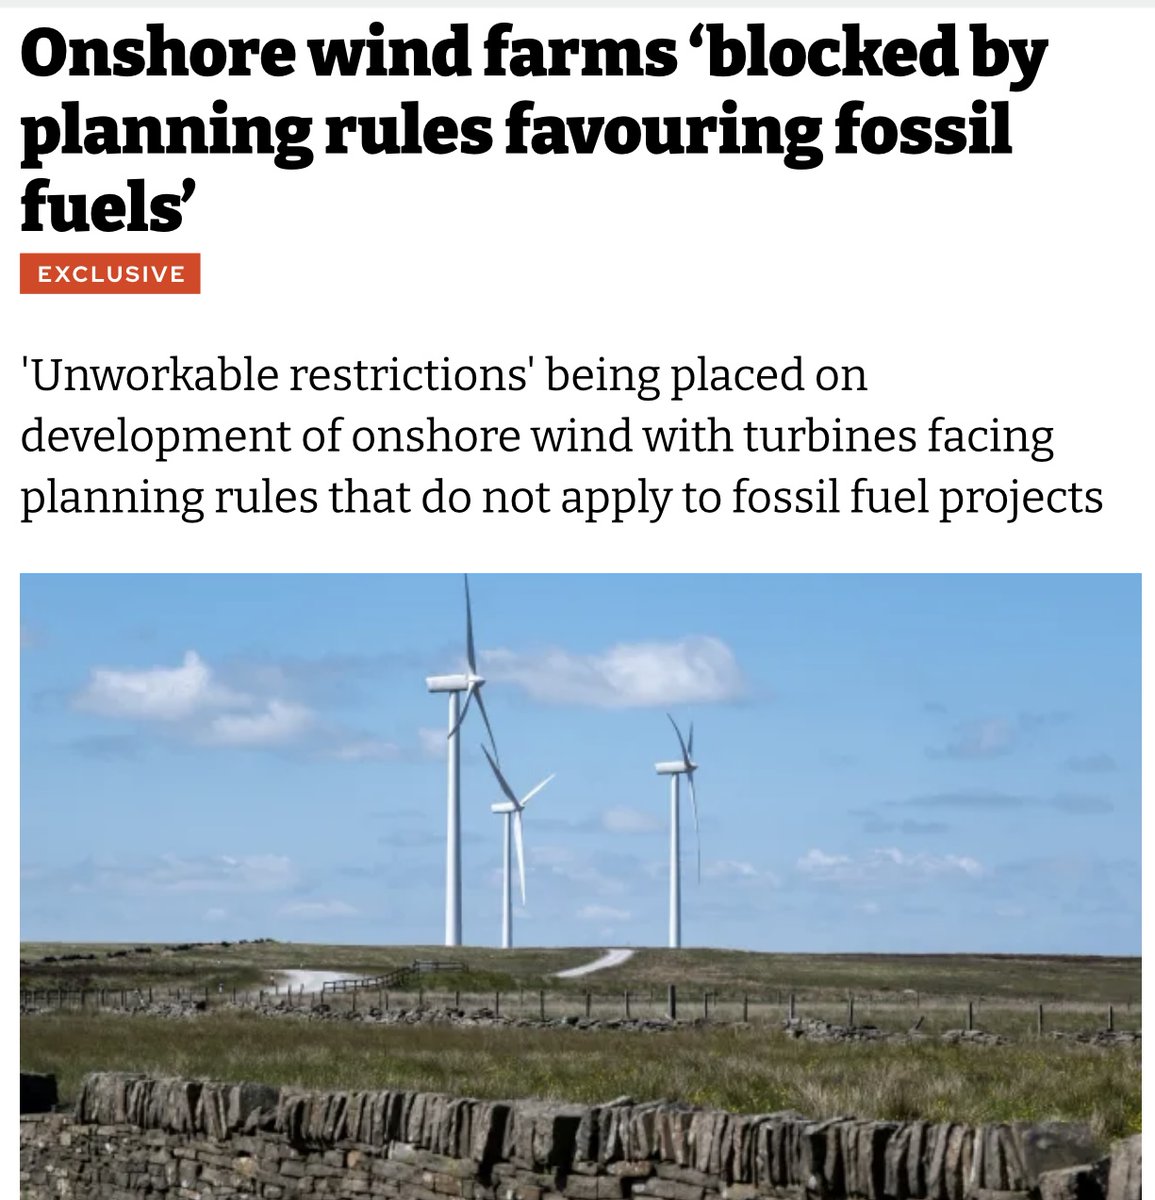 NEW 🚨 Dozens of organisations are calling for change as they reveal wind turbines are being 'unfairly singled out' in planning rules. It's blindingly obvious that to bring down electricity bills we MUST get more renewables onto the grid.